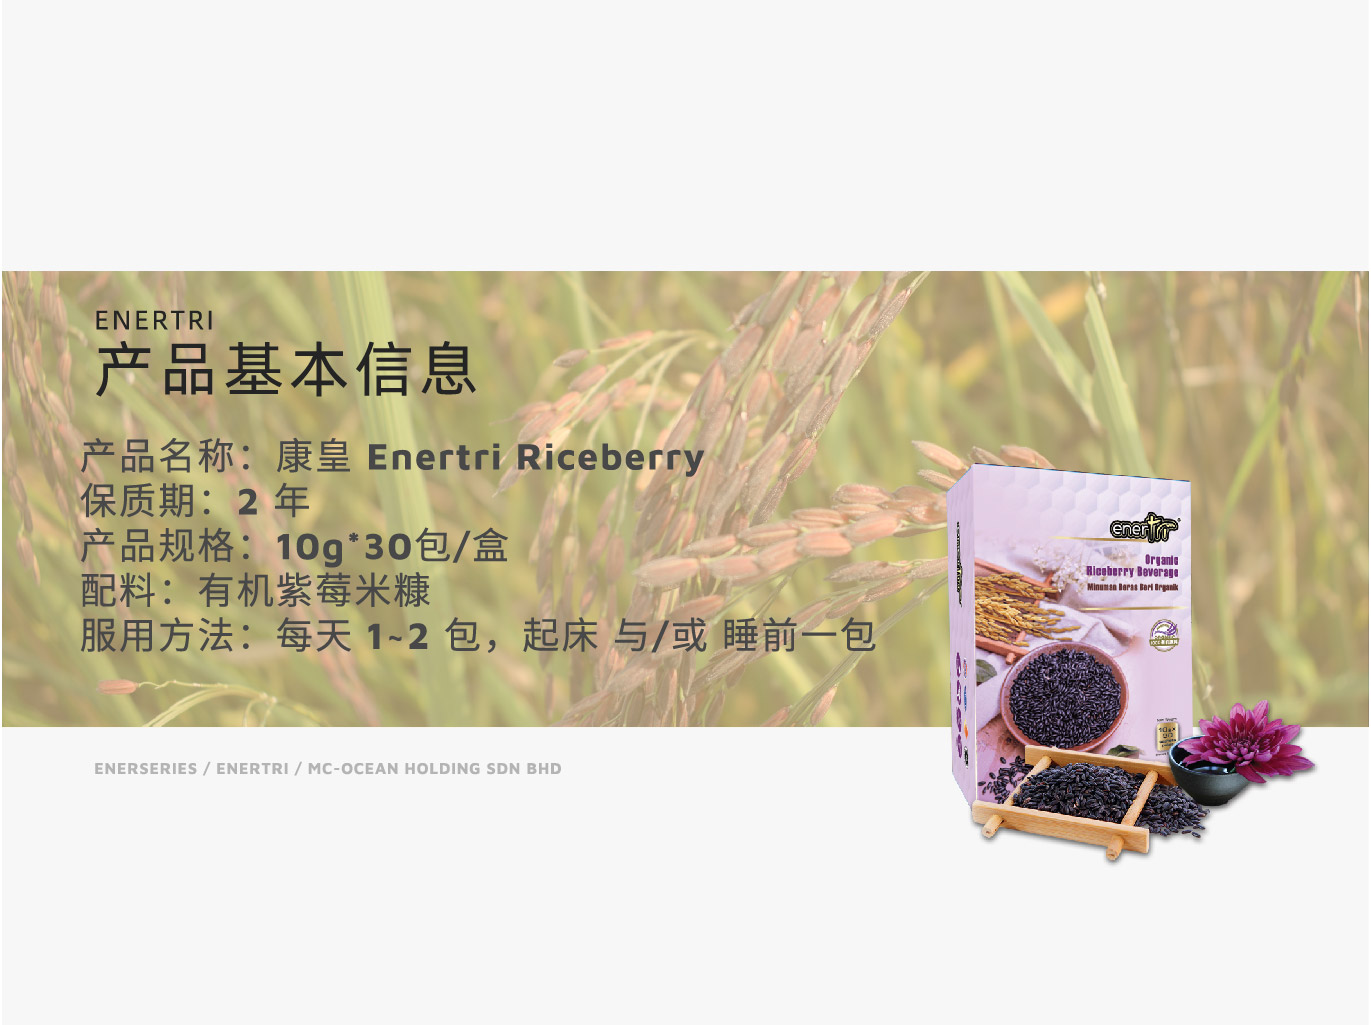 Riceberry product details